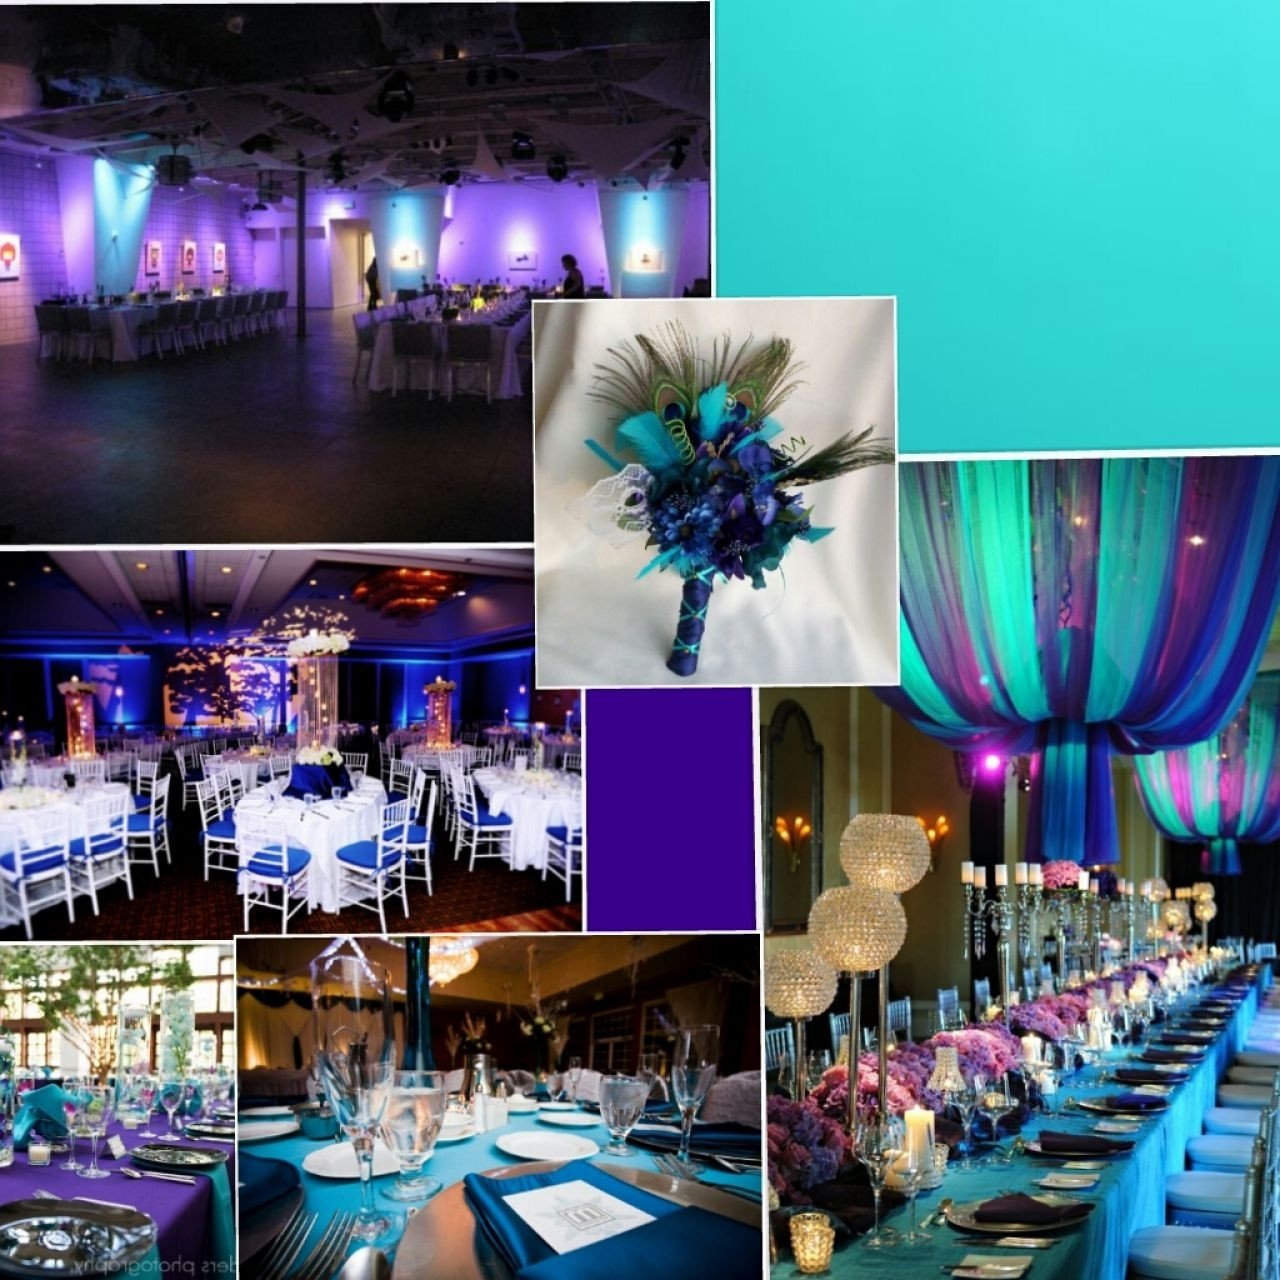 10 Perfect Purple And Turquoise Wedding Ideas purple and turquoise wedding decorations beautiful decor best ideas 2023